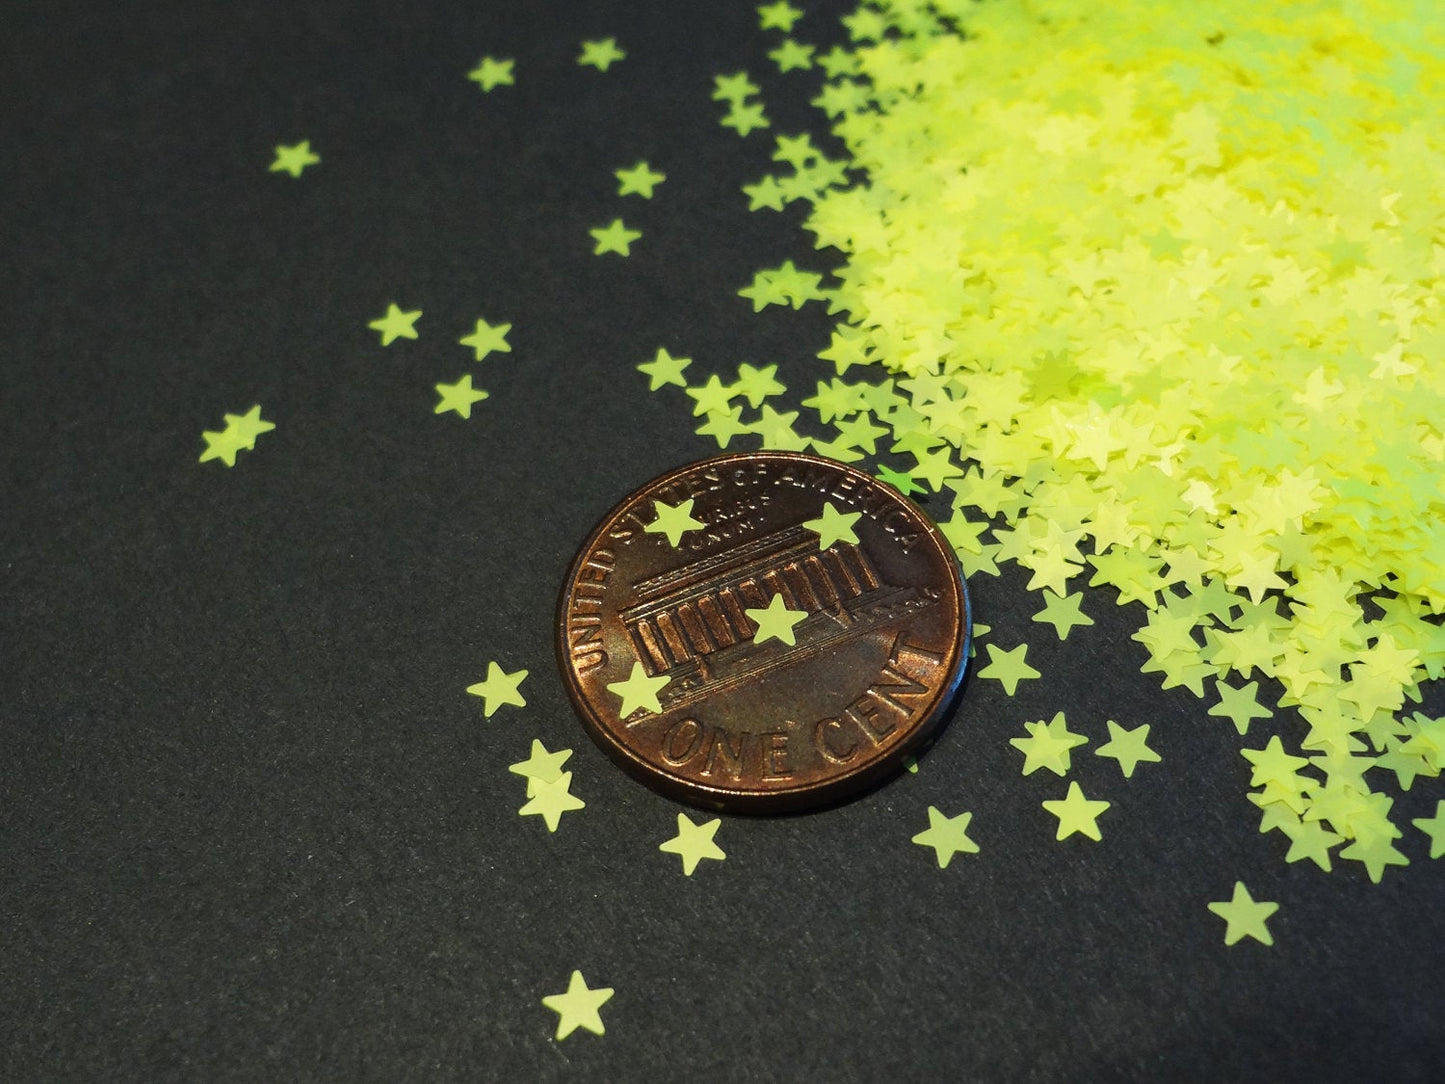 Load image into Gallery viewer, Matte Neon Yellow Star Glitter, 3mm
